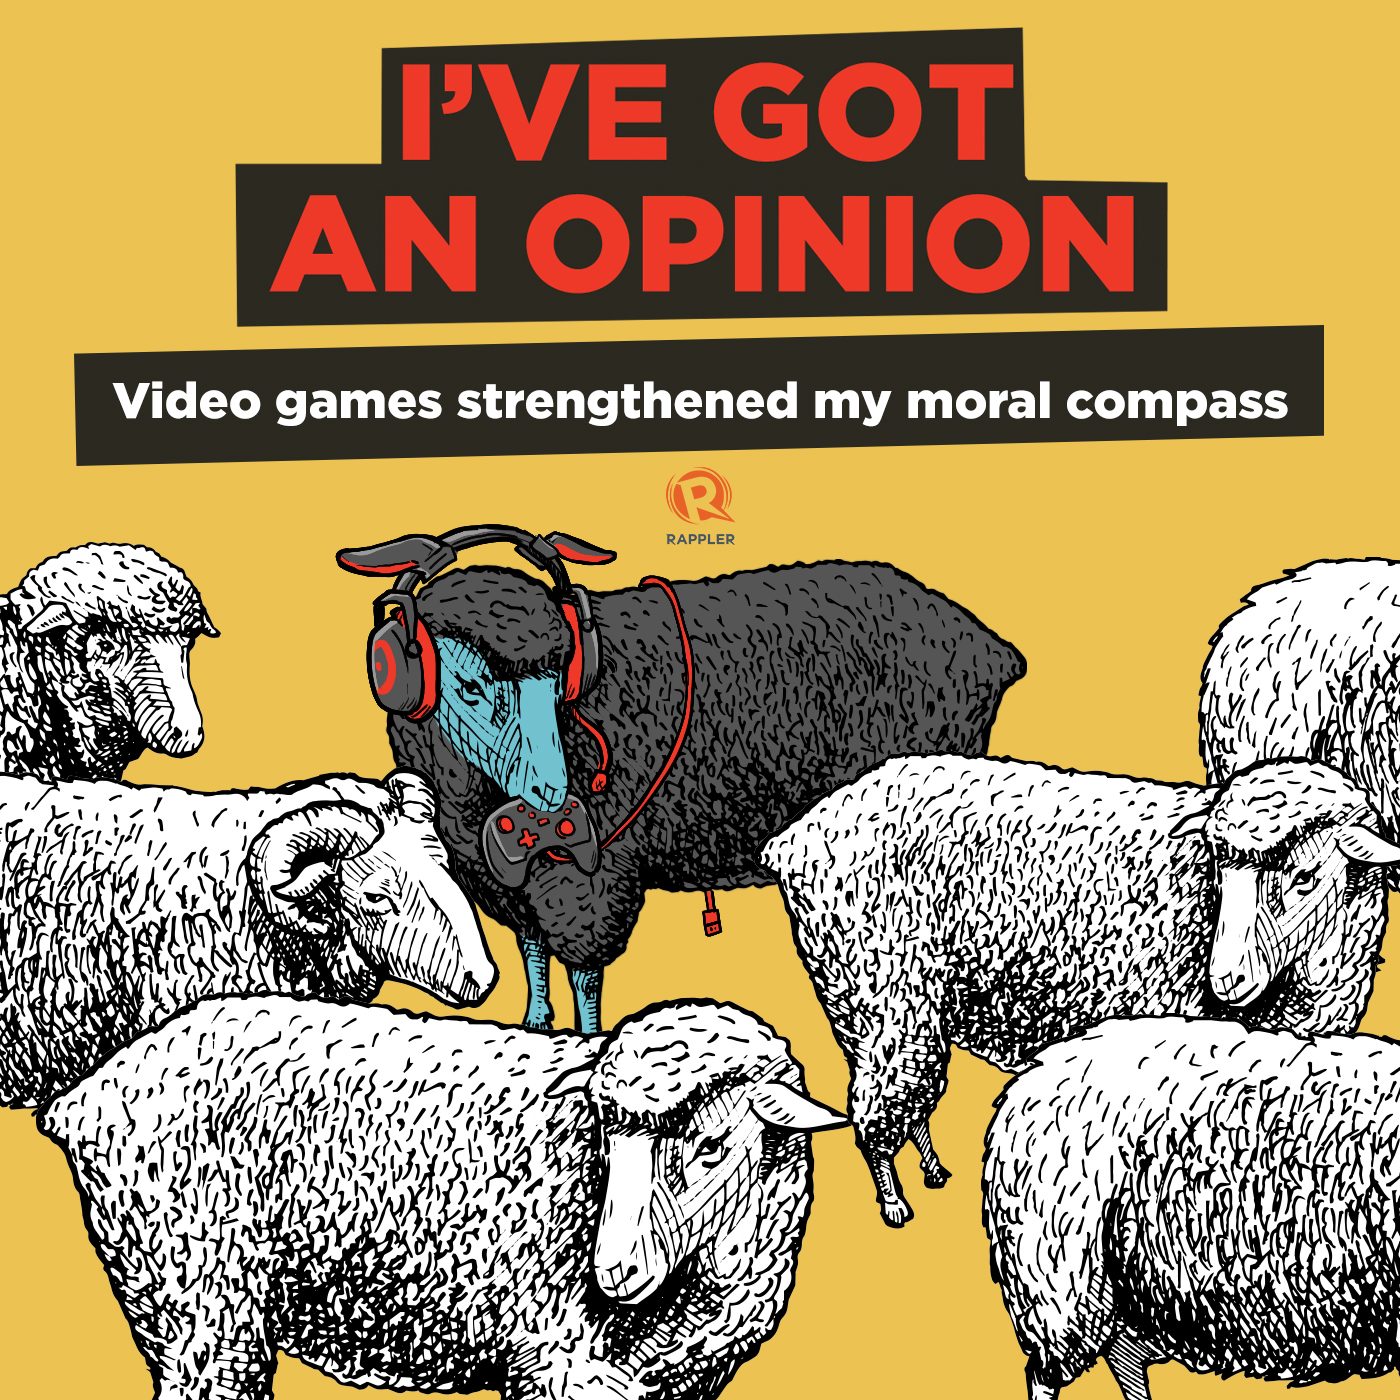 [PODCAST] I’ve Got An Opinion: Video games strengthened my moral compass